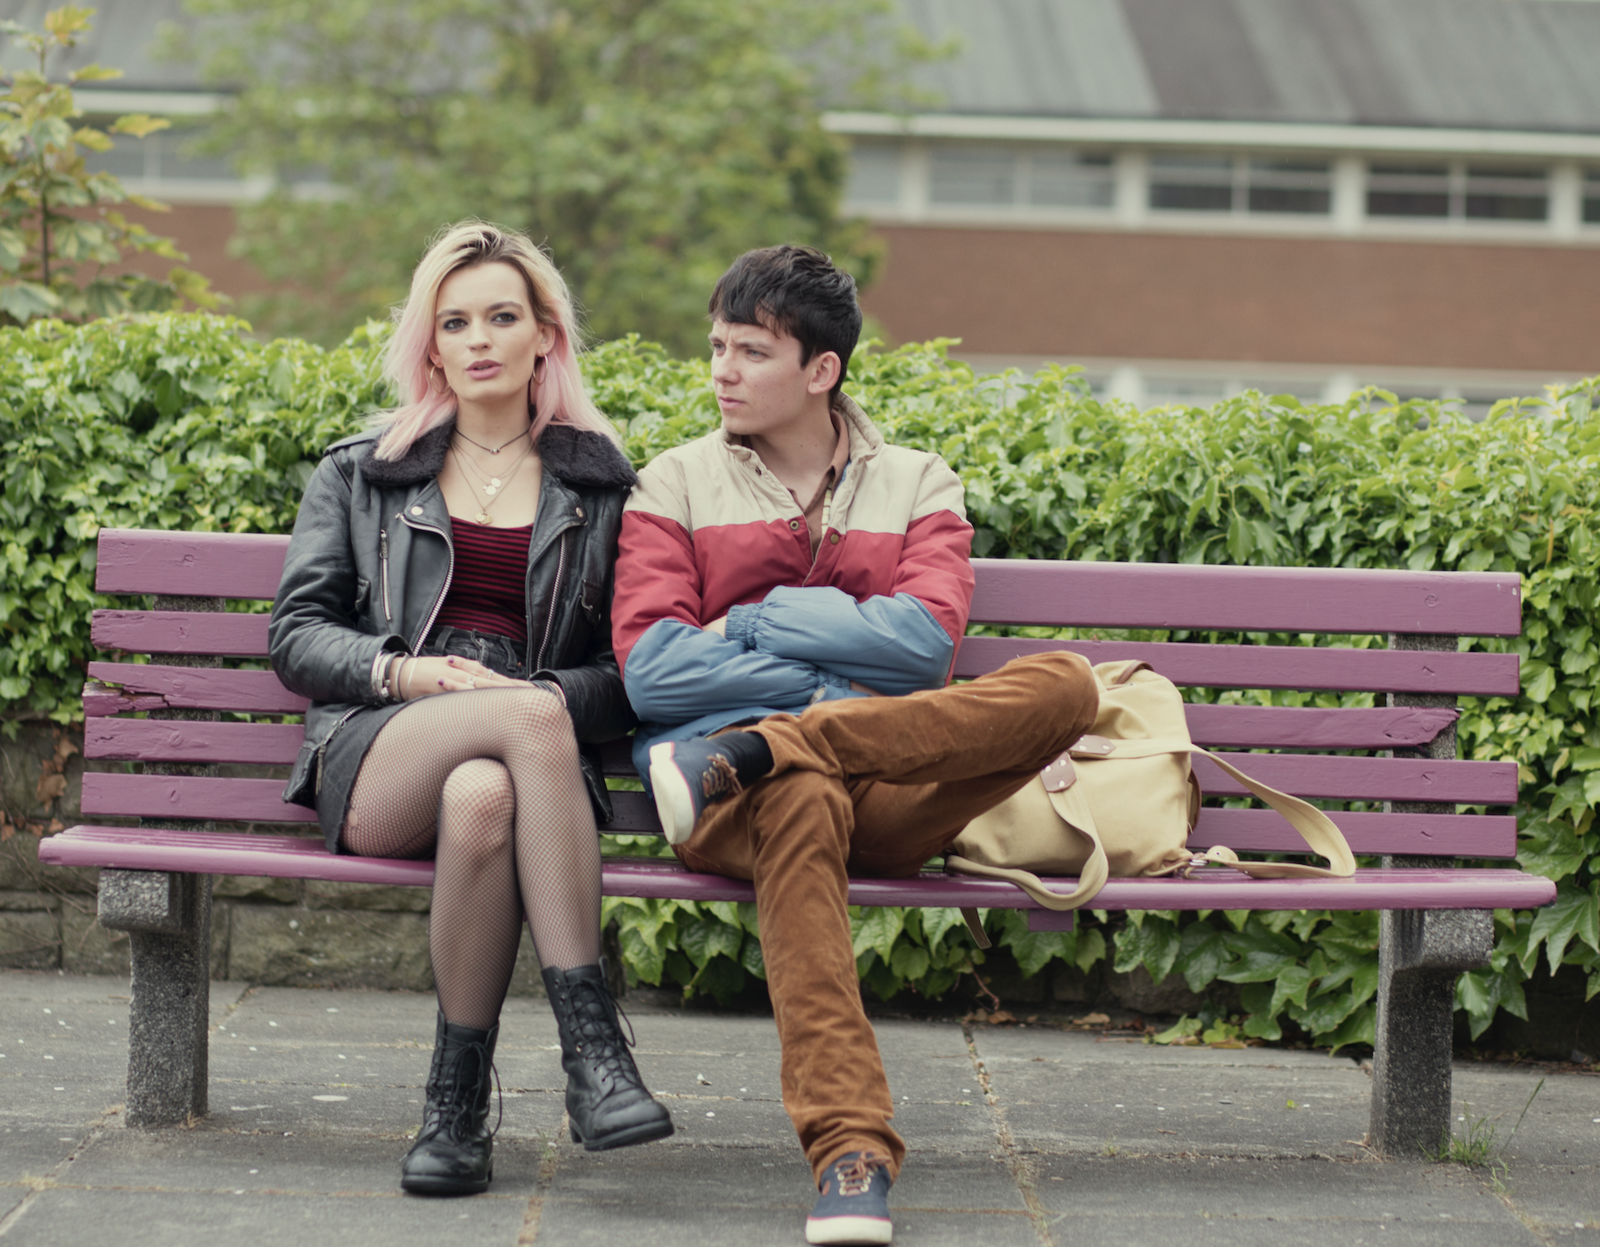 Education started streaming on Netflix and it follows Otis, the son of a se...